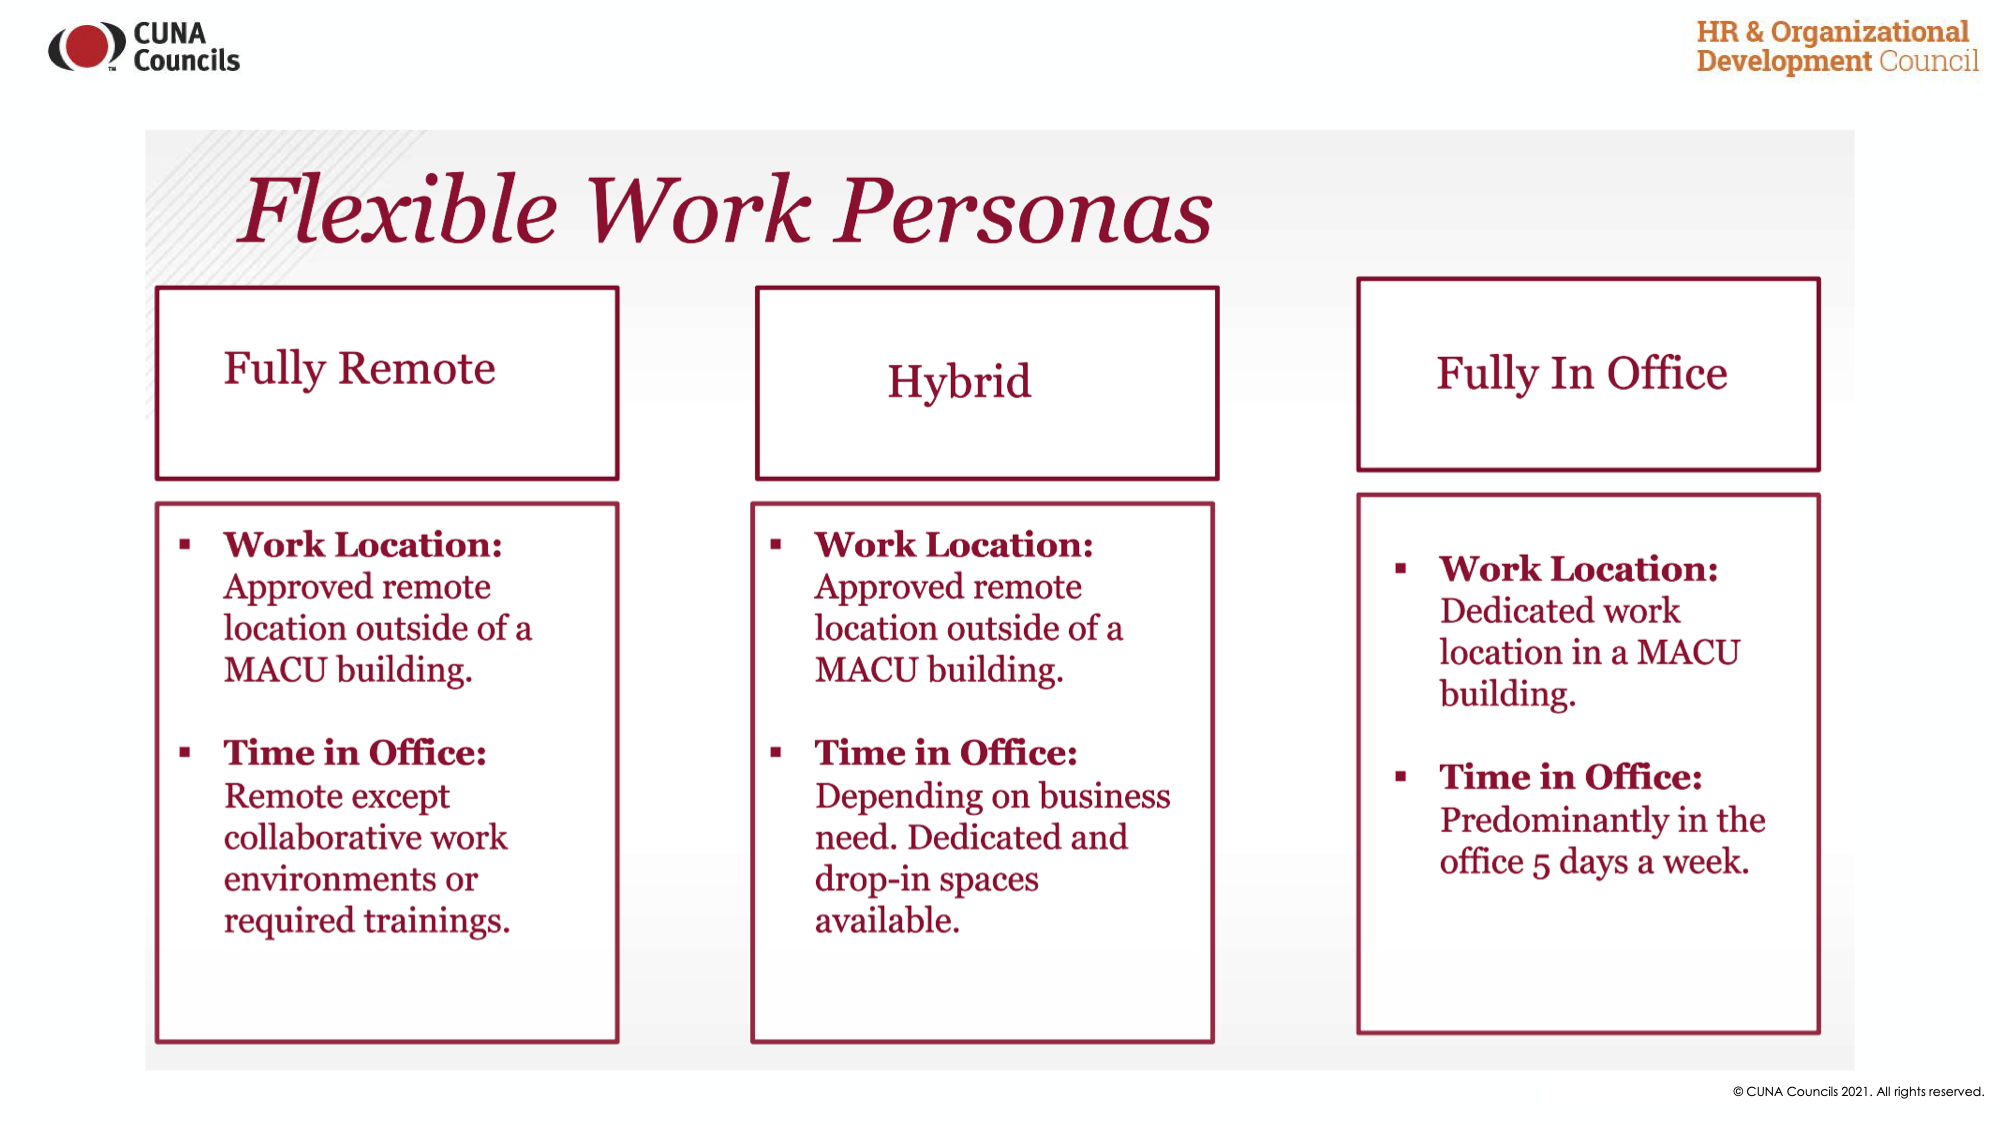 In a post-COVID world, workforces will be a combination remote, hybrid, and in-office employees.